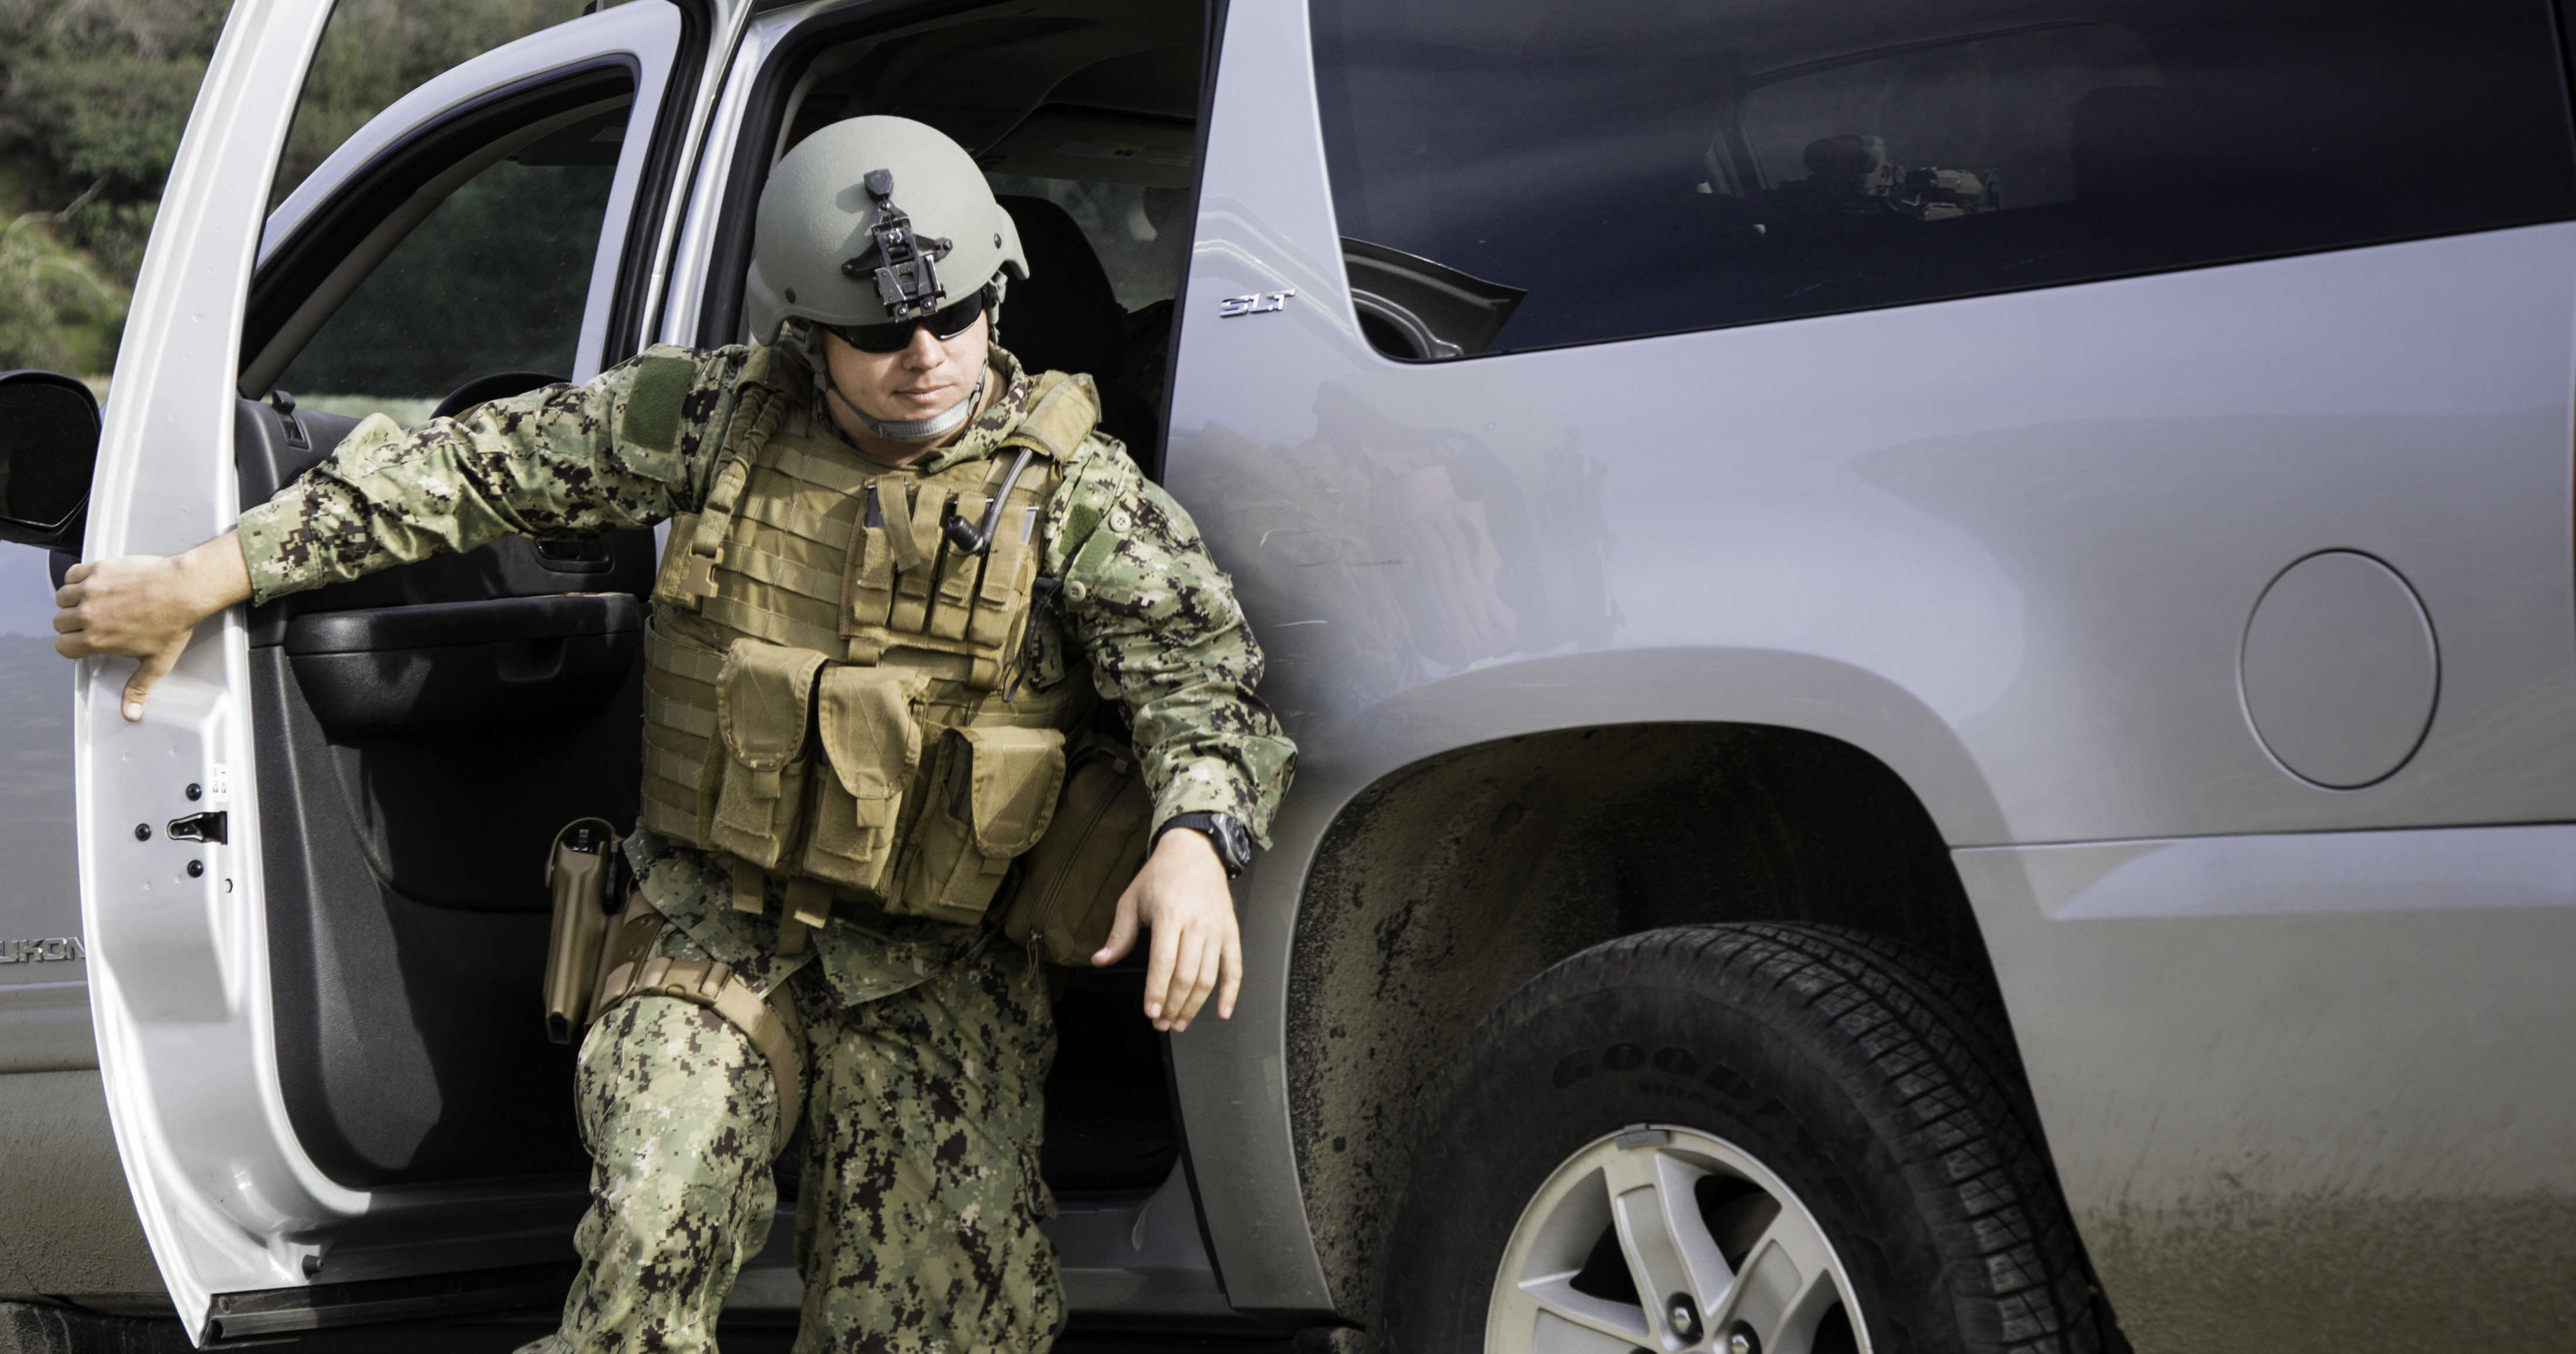 This is what you need to know about Hawaii’s ancient special forces